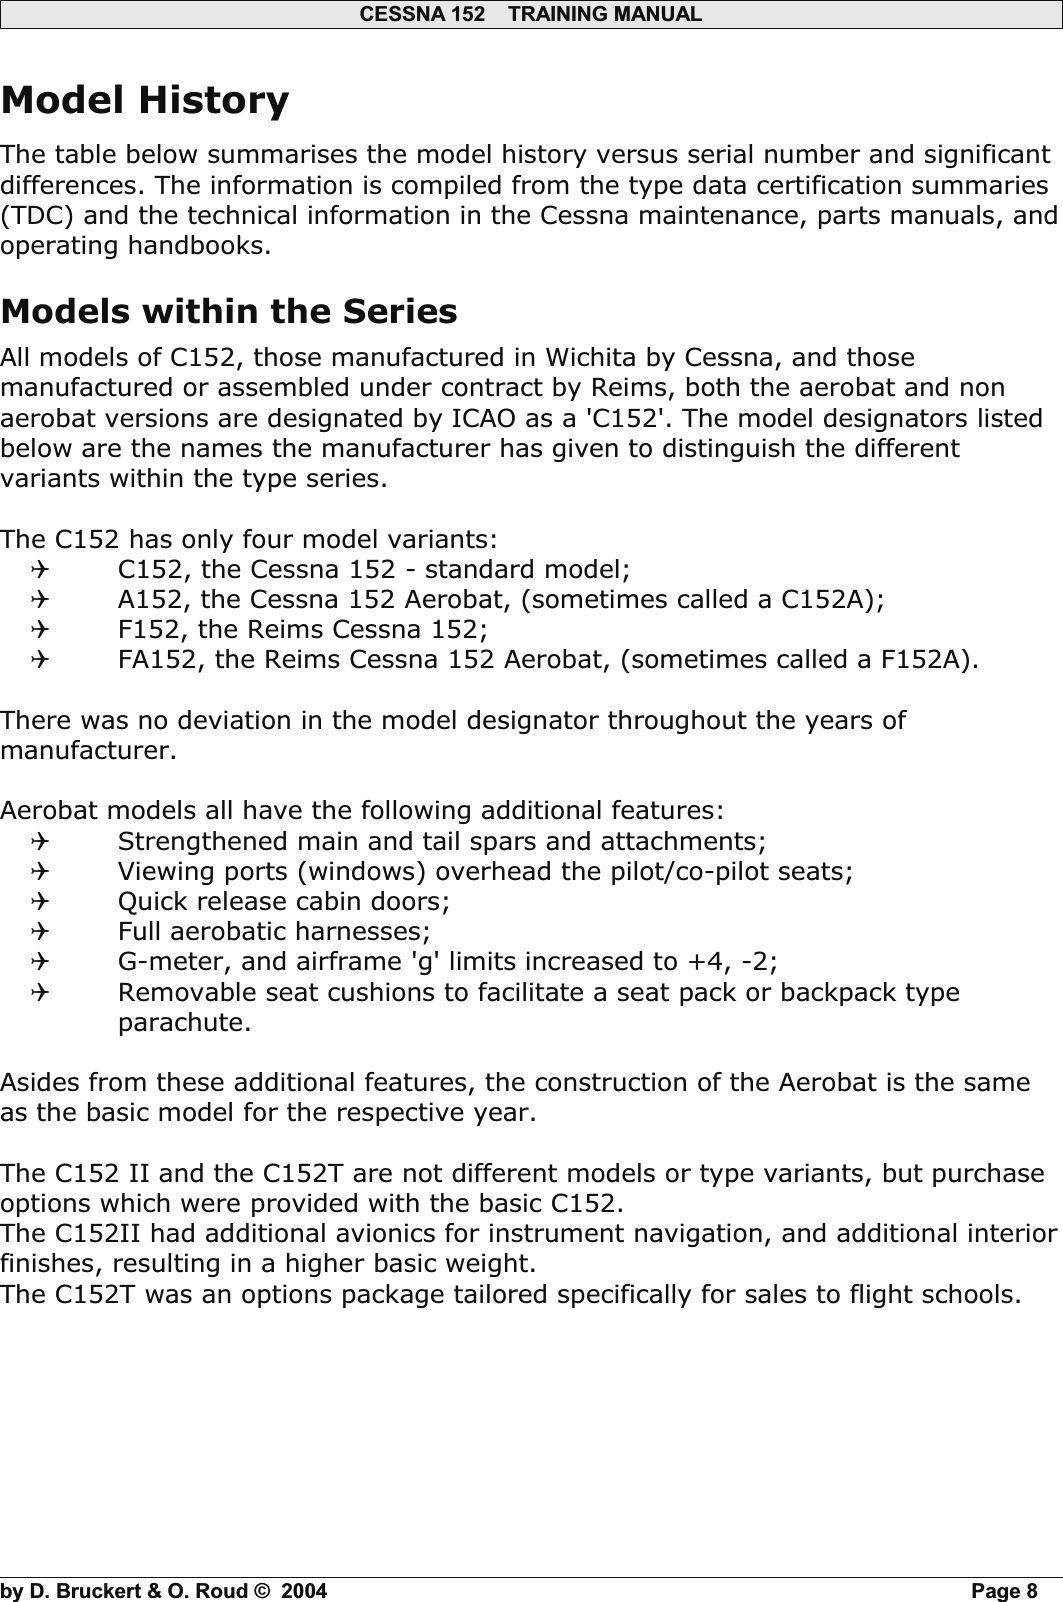 Page 1 of 5 - Introduction Cessna_C152_-History_RSV-Training-Manuals-2011 Cessna C152 -History RSV-Training-Manuals-2011